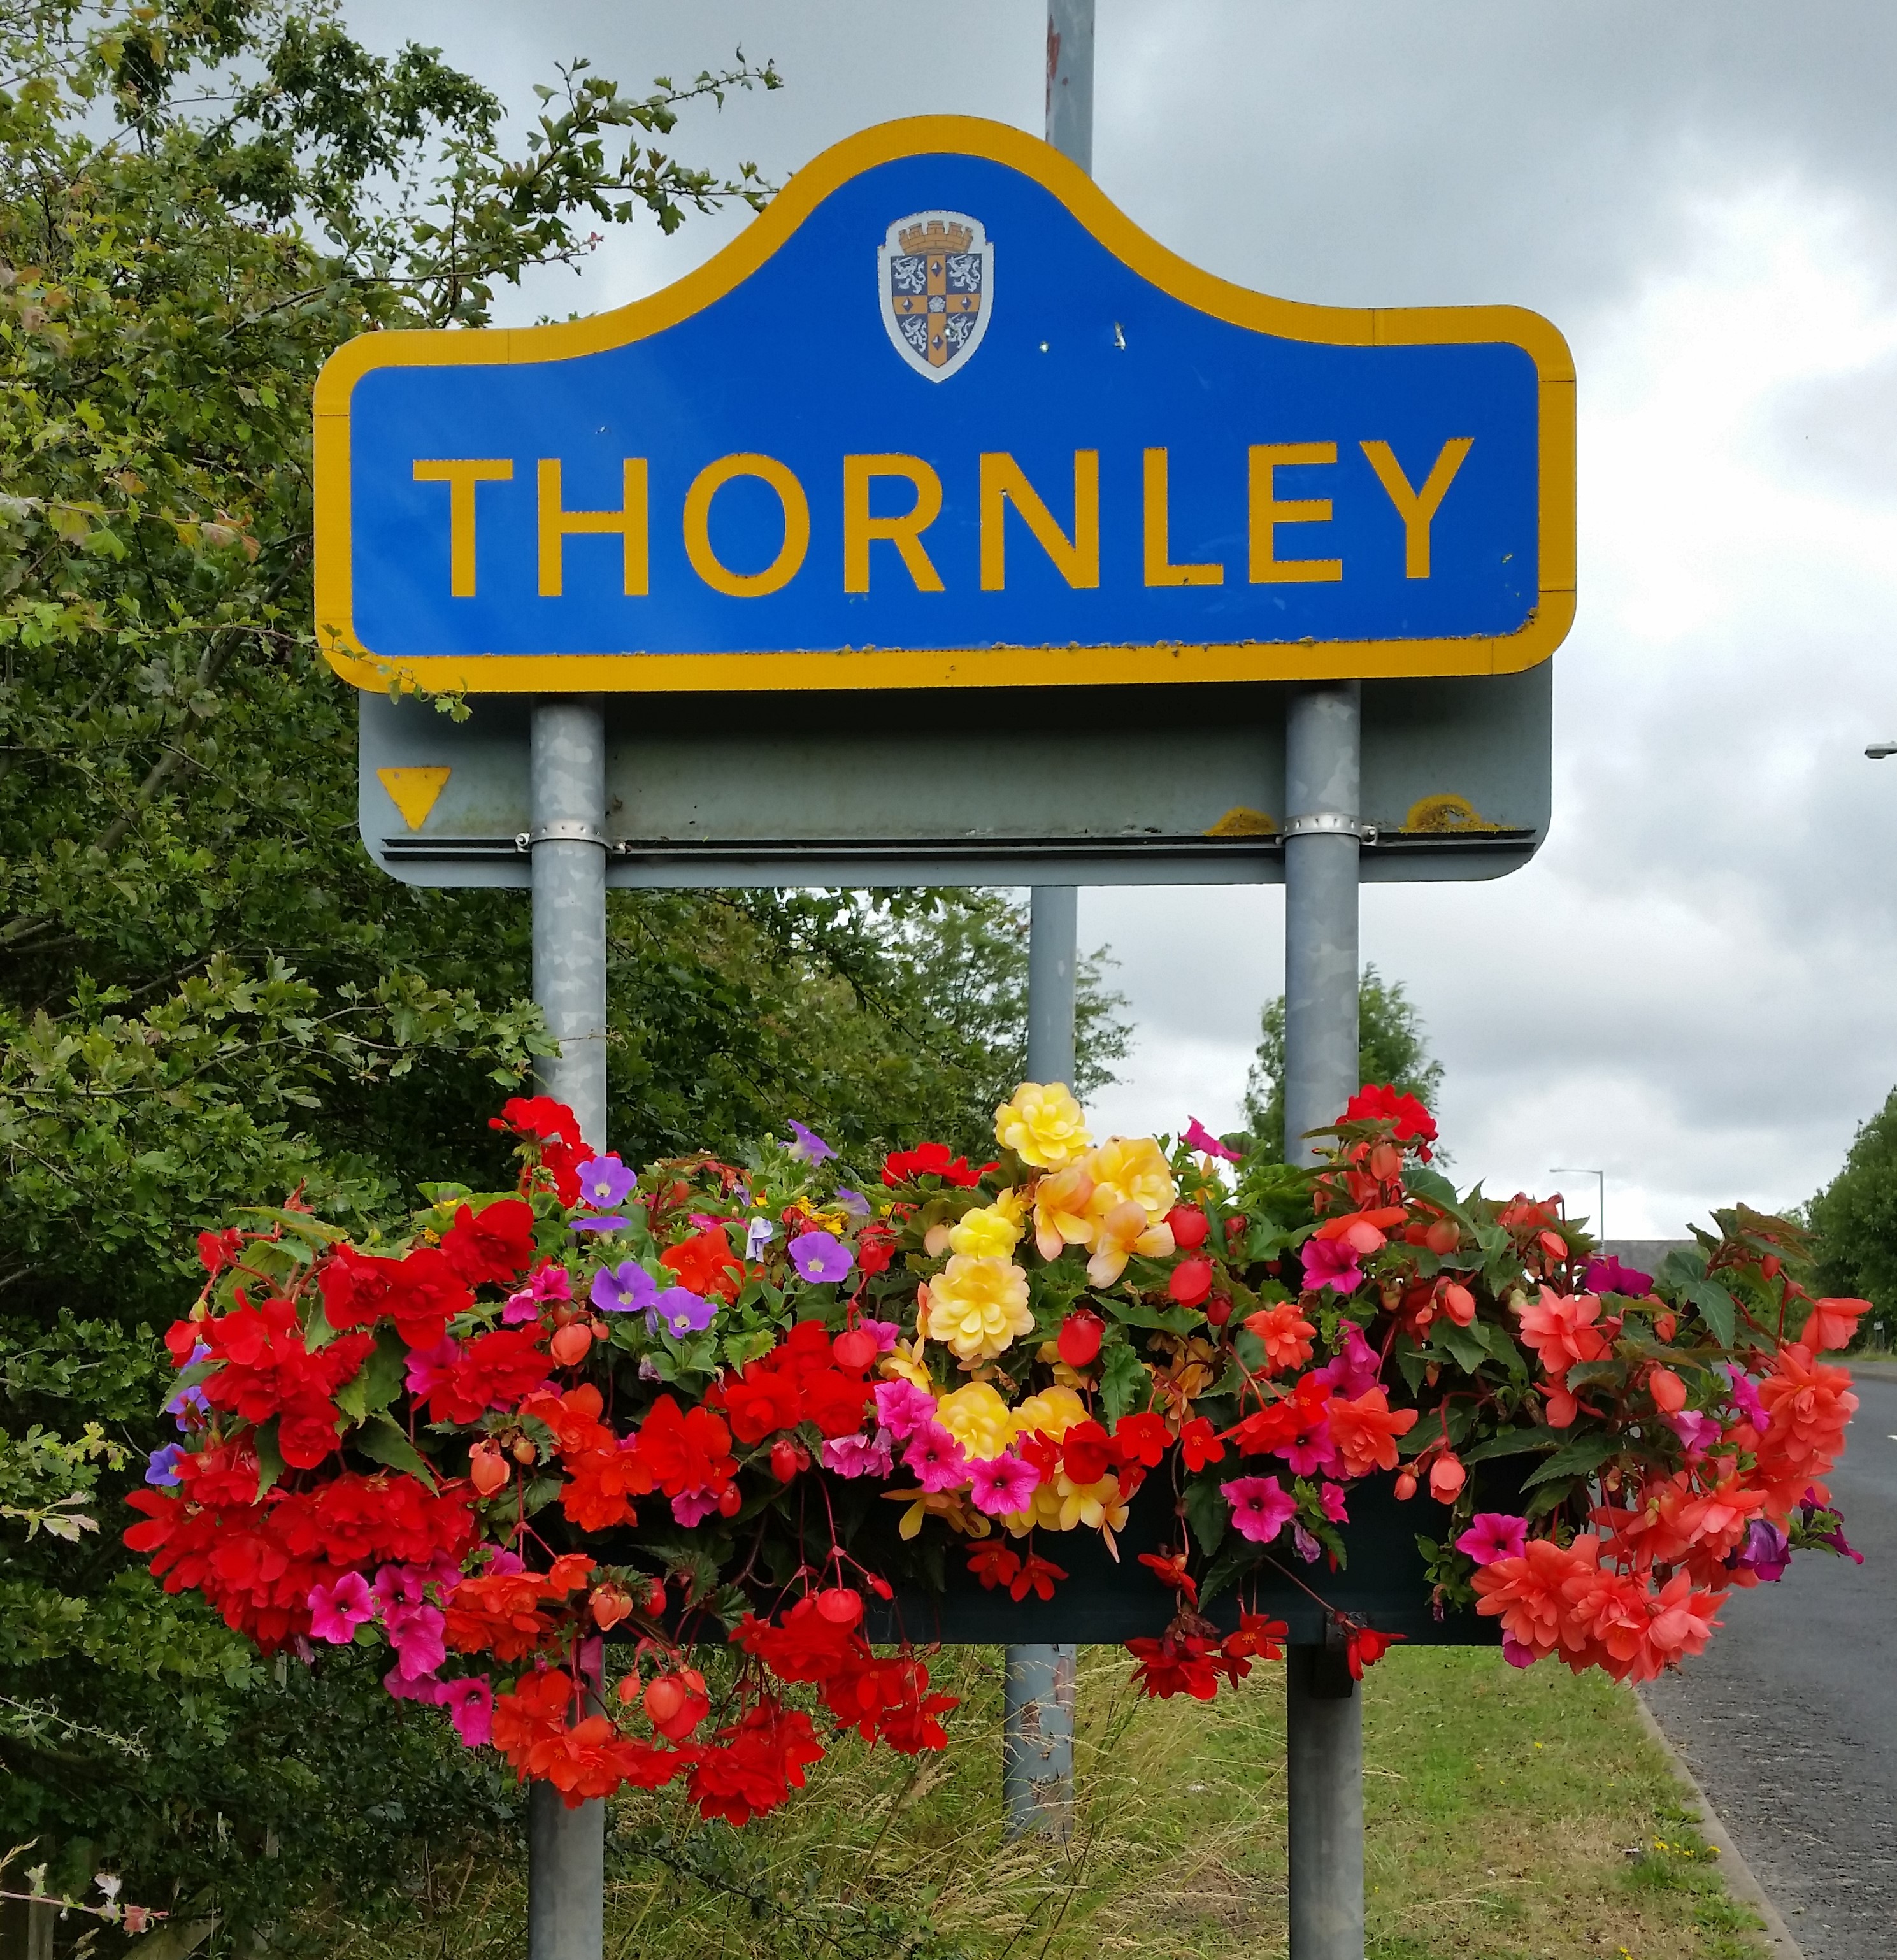 photo of Thornley village entrance sign with floral display